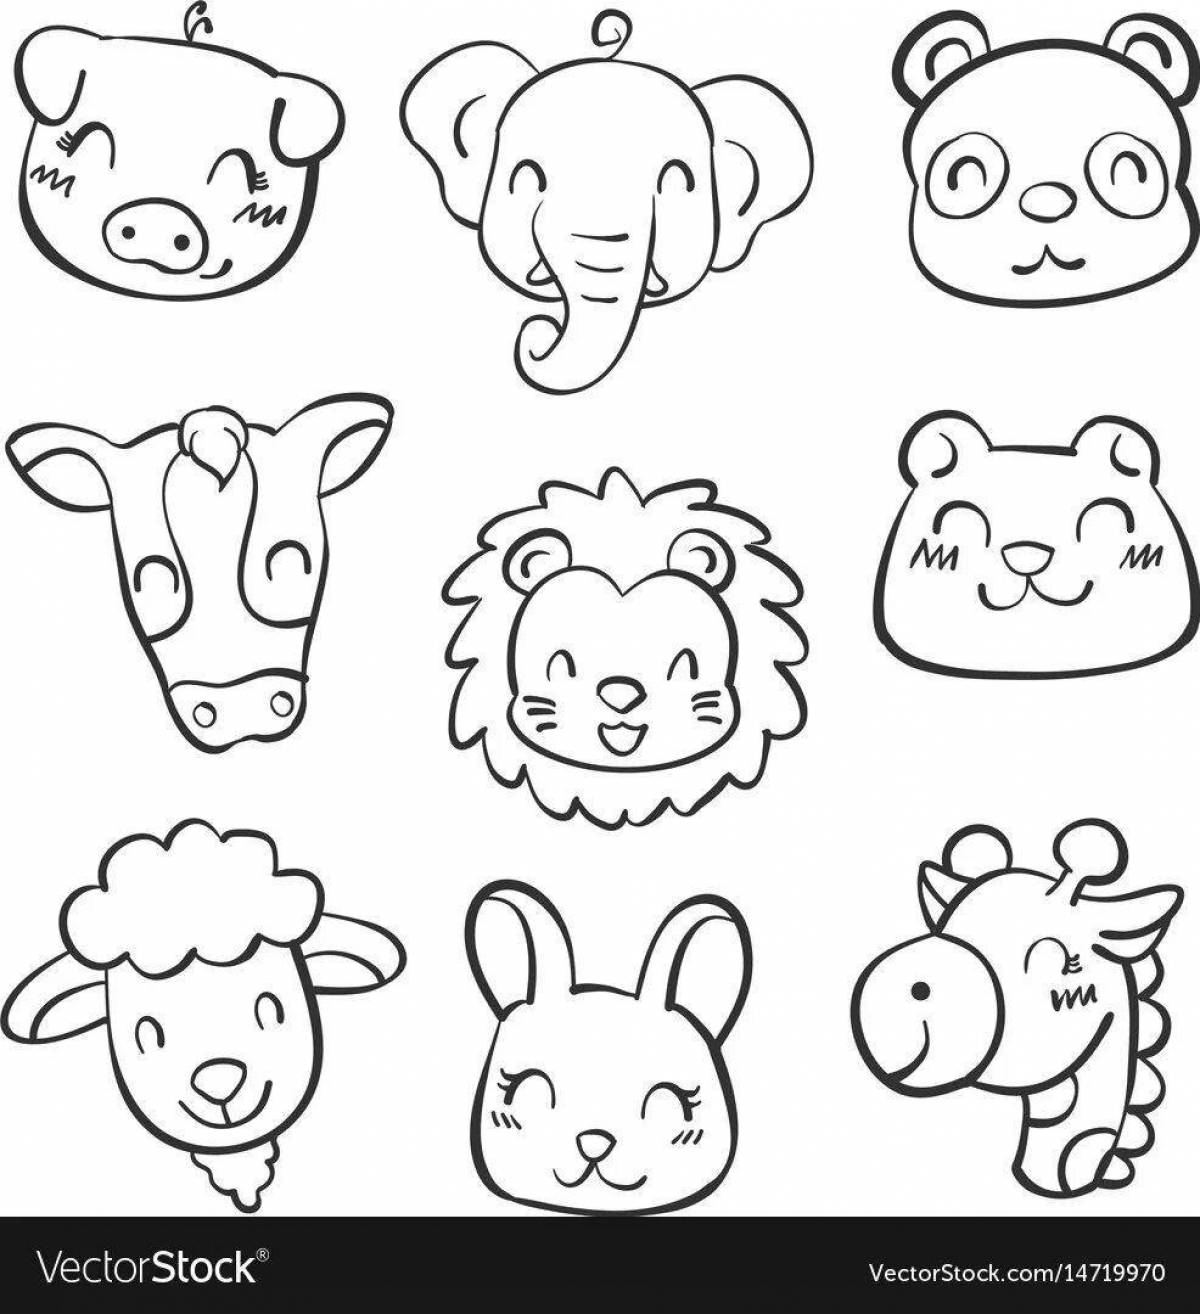 Exciting animal coloring page